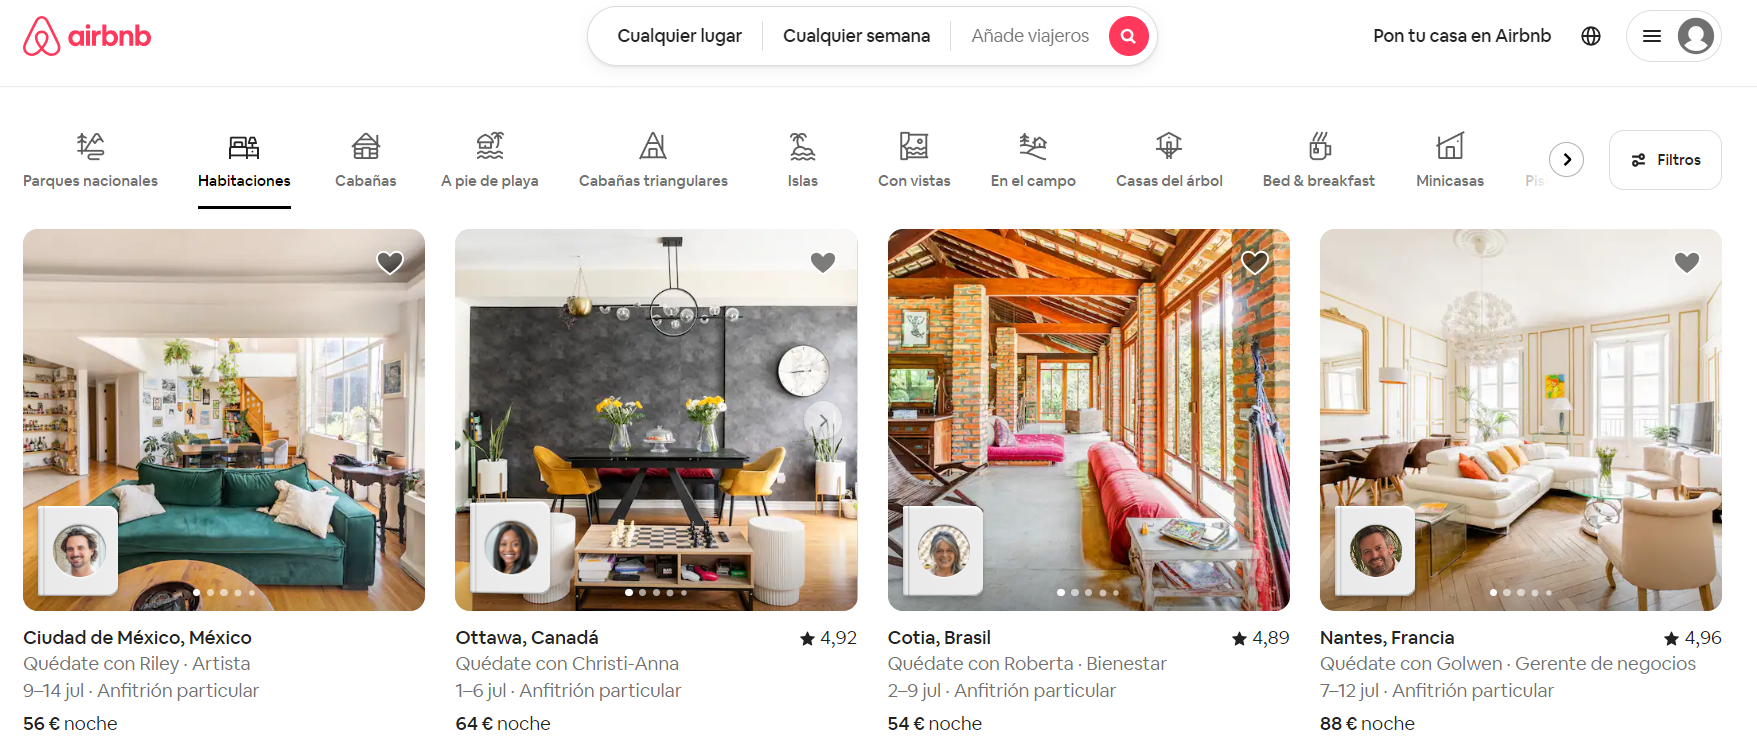 ecommerce airbnb (1)